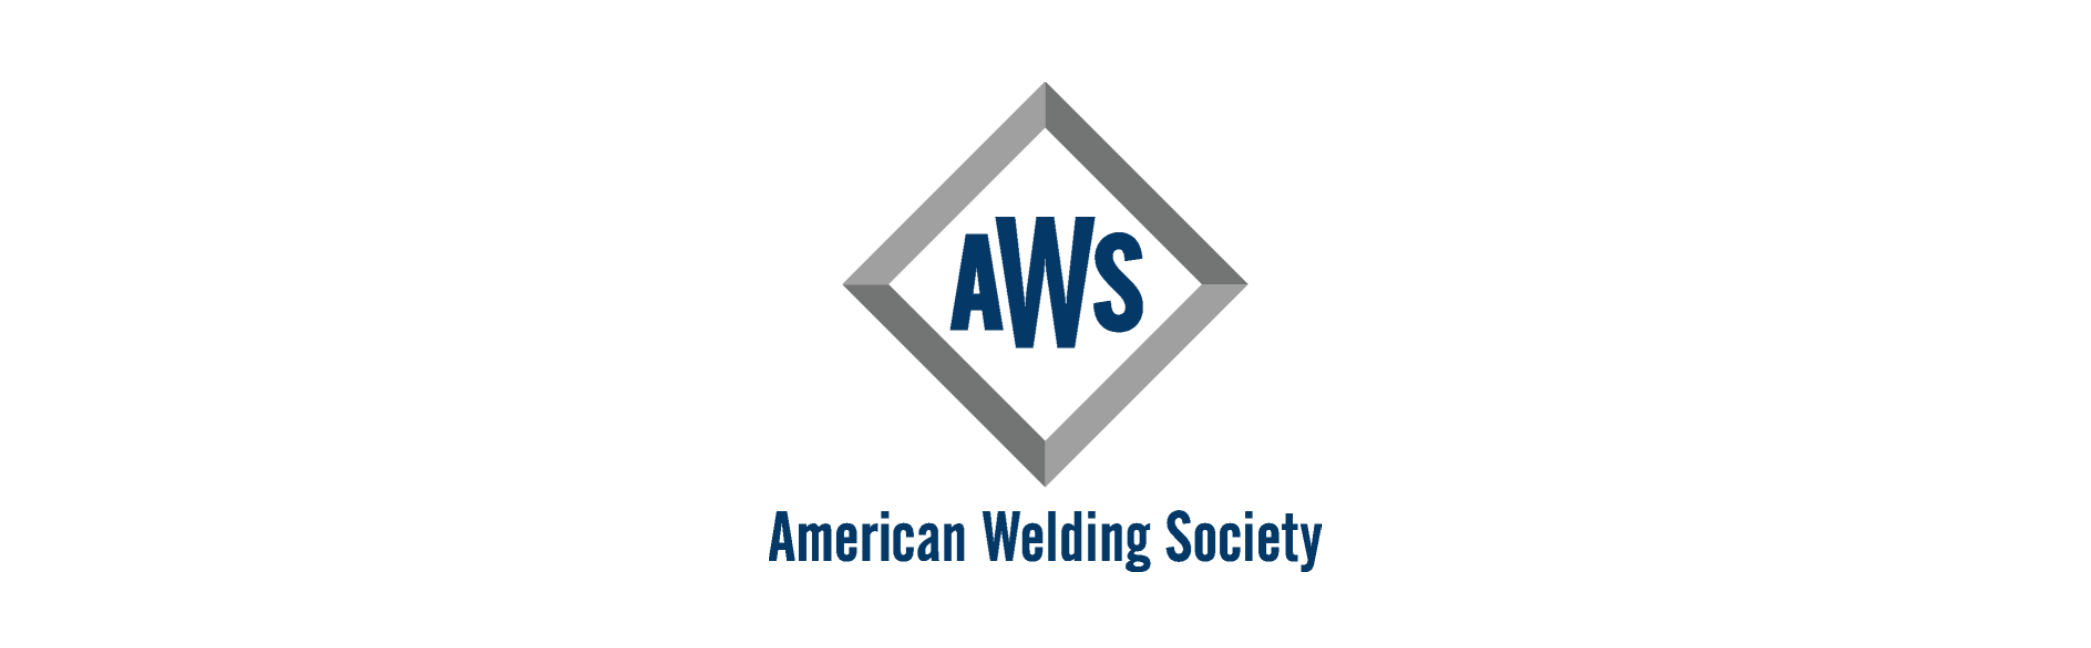 Adult & Continuing Education Center Among American Welding Society Foundation Grant